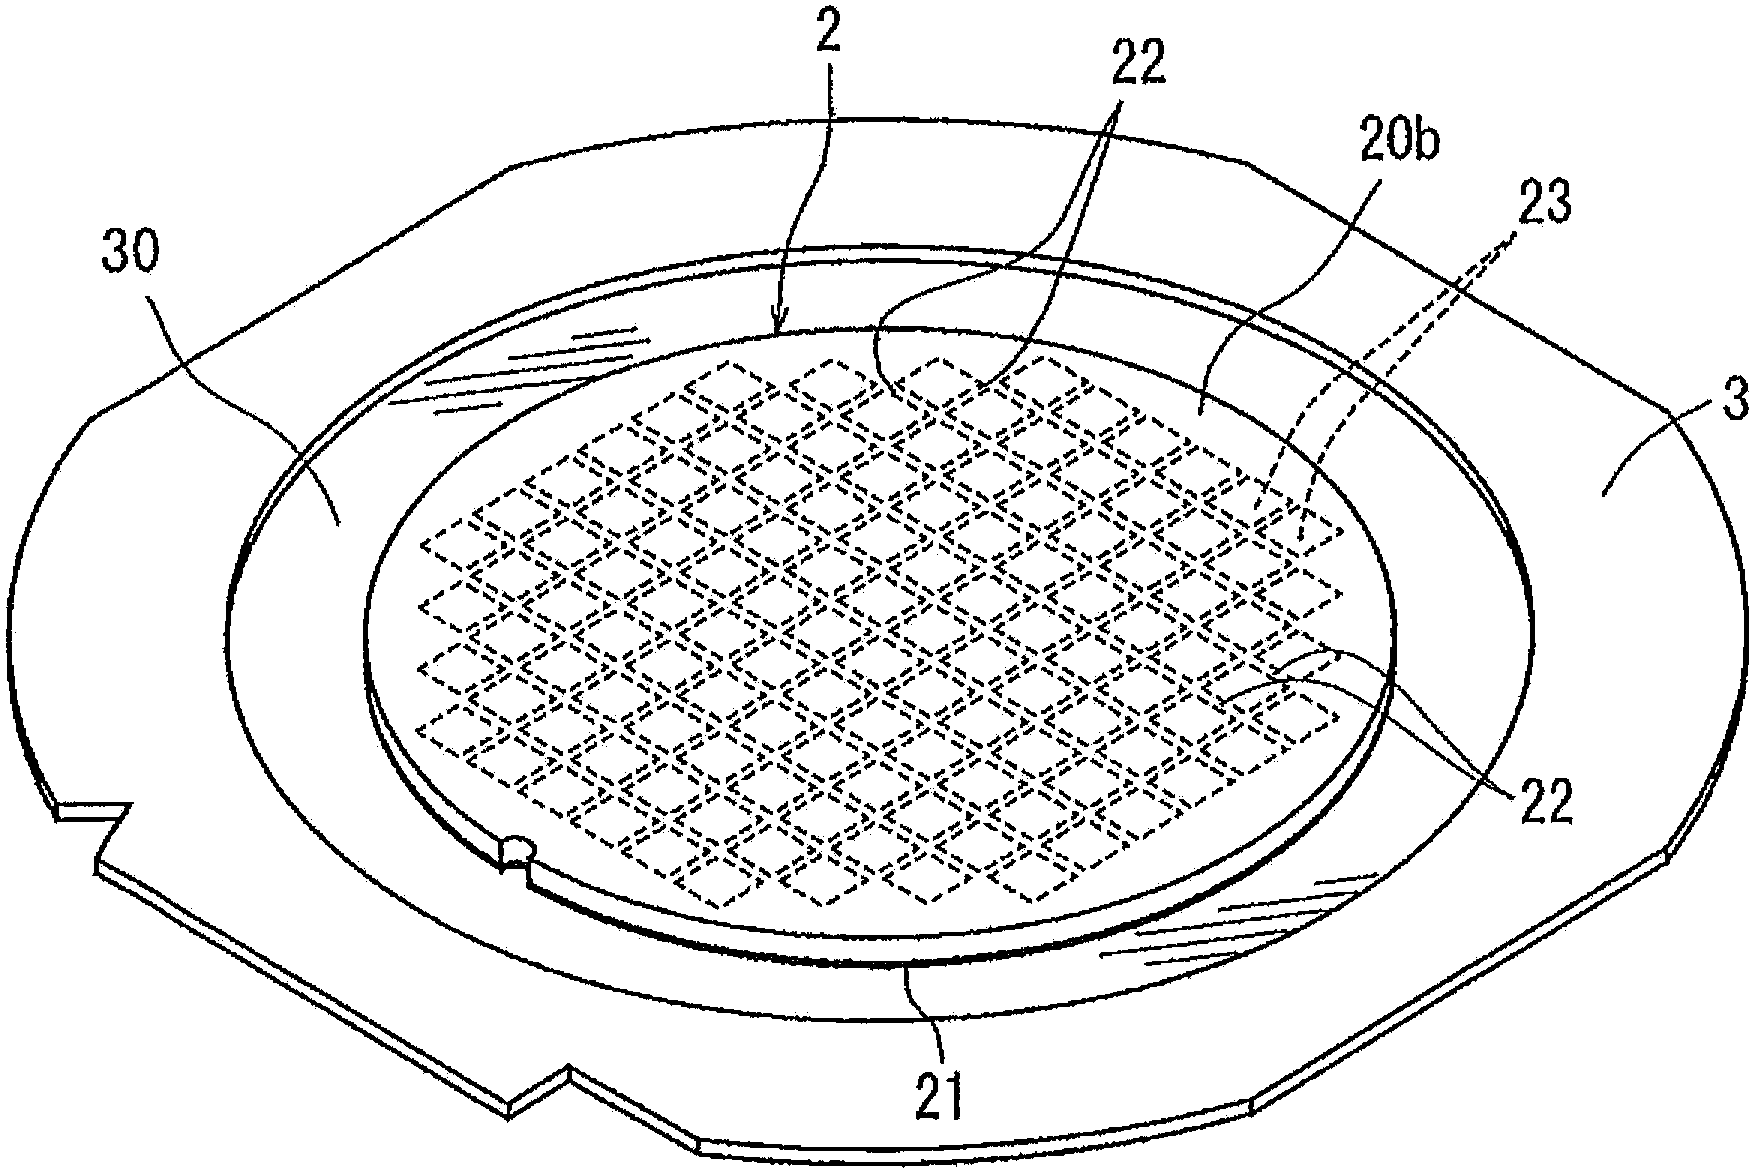 Optical device wafer processing method